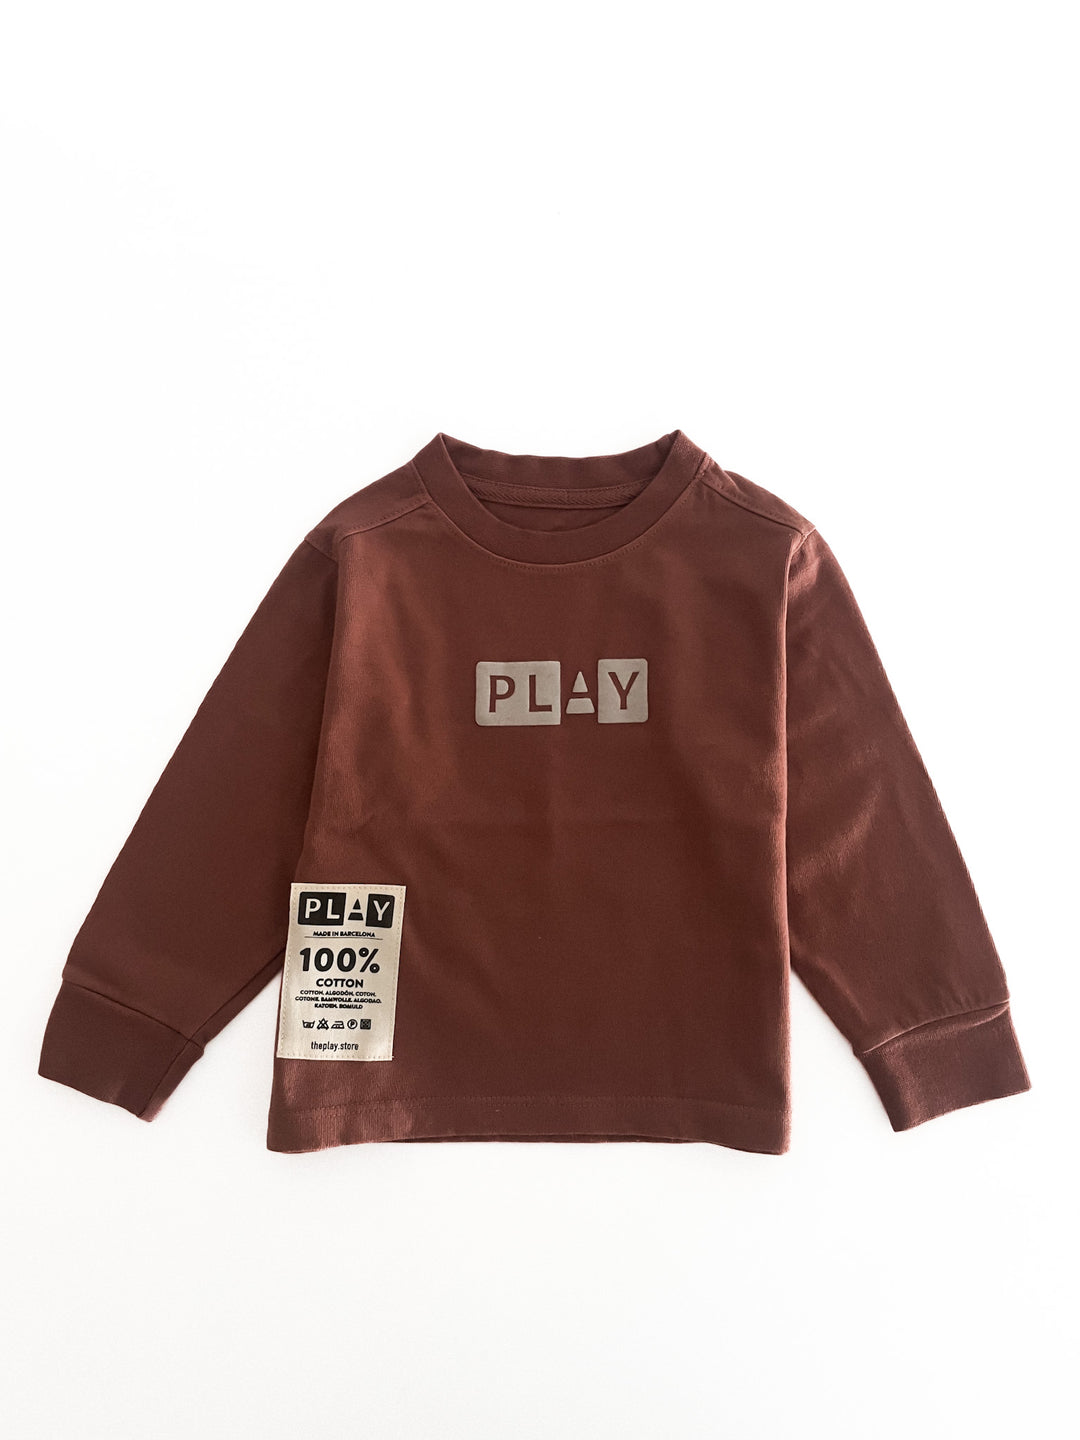 ALL WEATHER PLAY LONG LS-Crimson